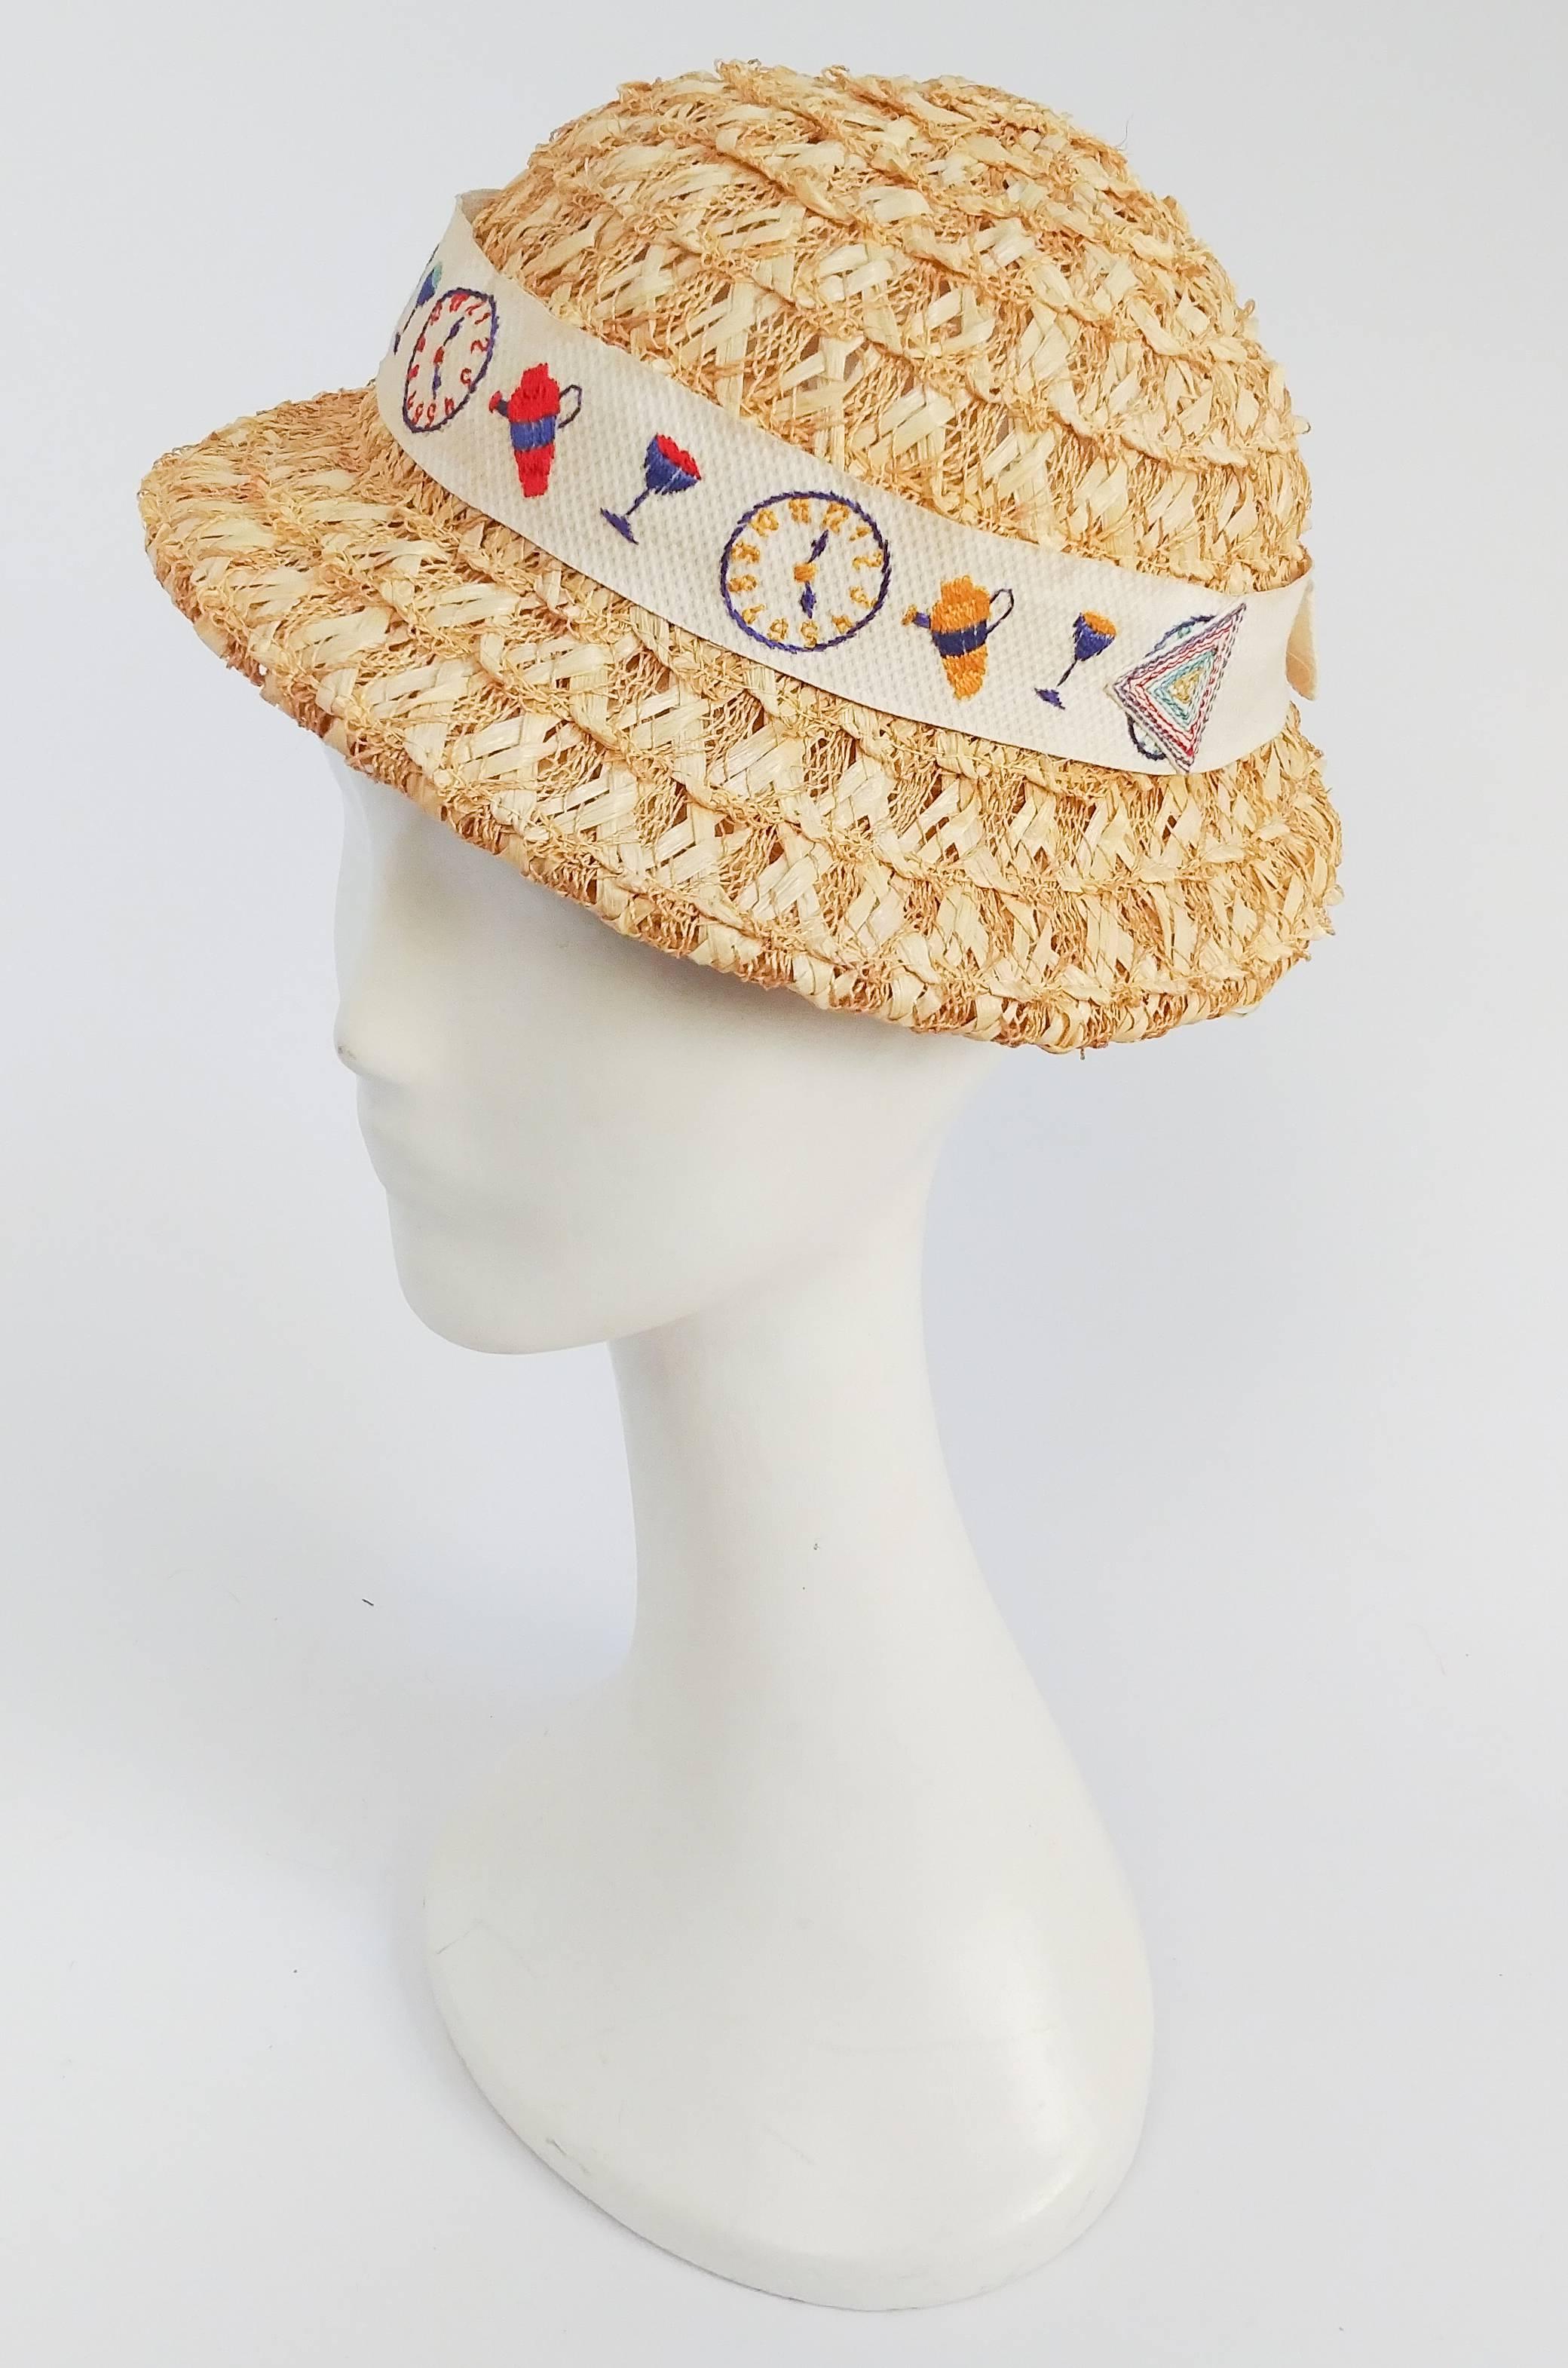 1930s Cocktail Time Straw Hat. Adorable 1930s day hat with embroidered pique ribbon featuring little shakers and cocktail glasses. 